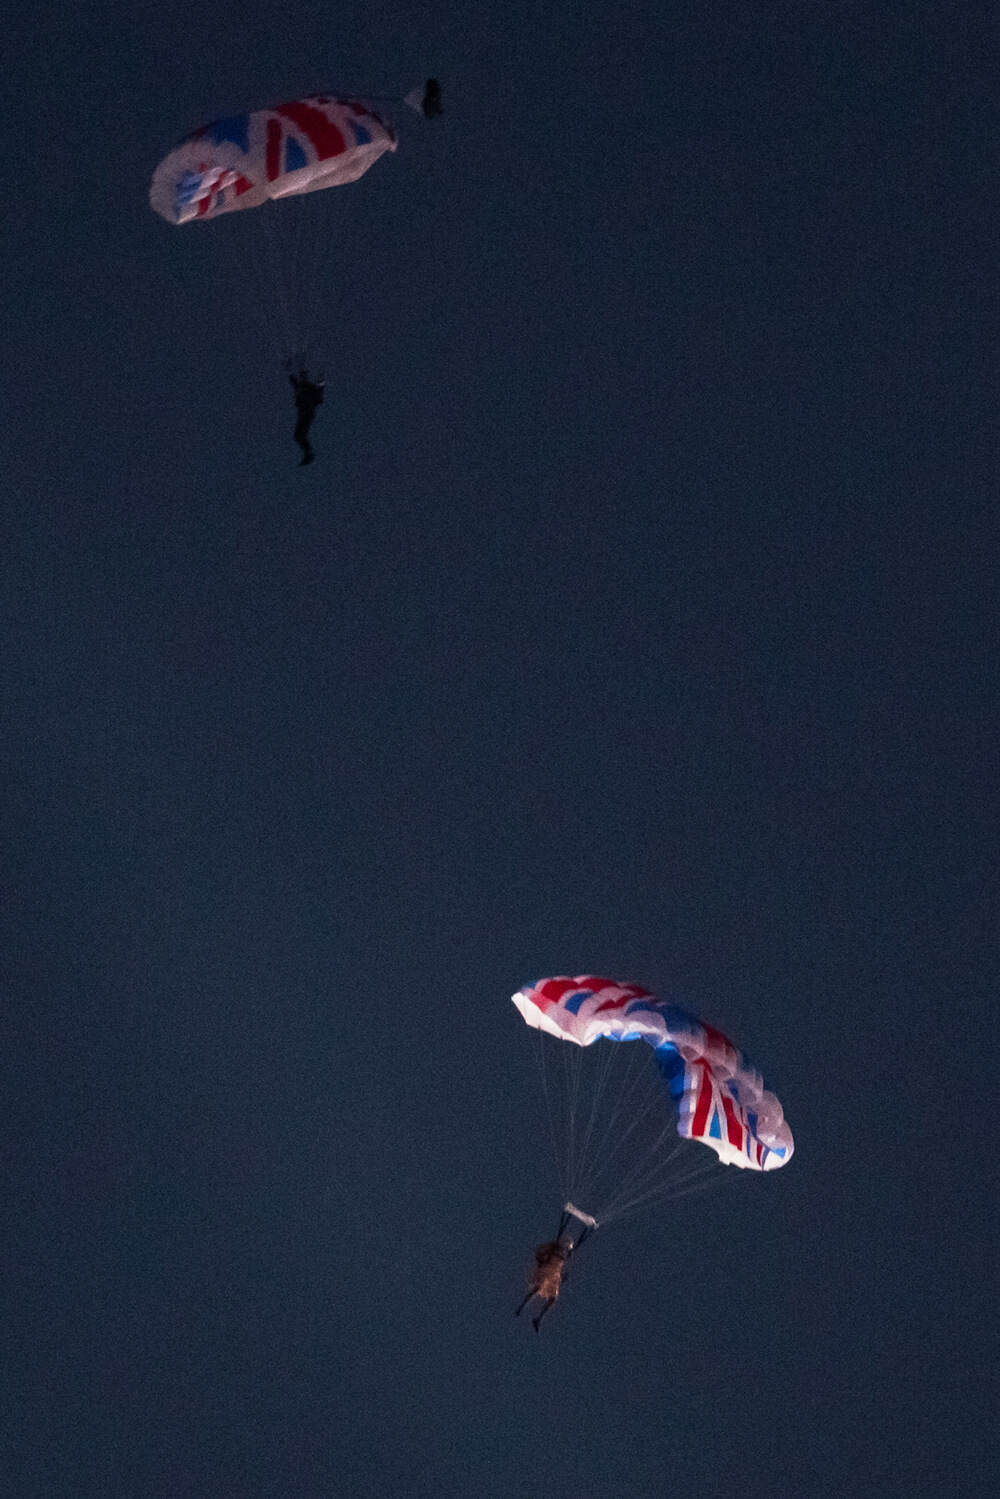 Two parachutes with the union jacks fall through the night sky.